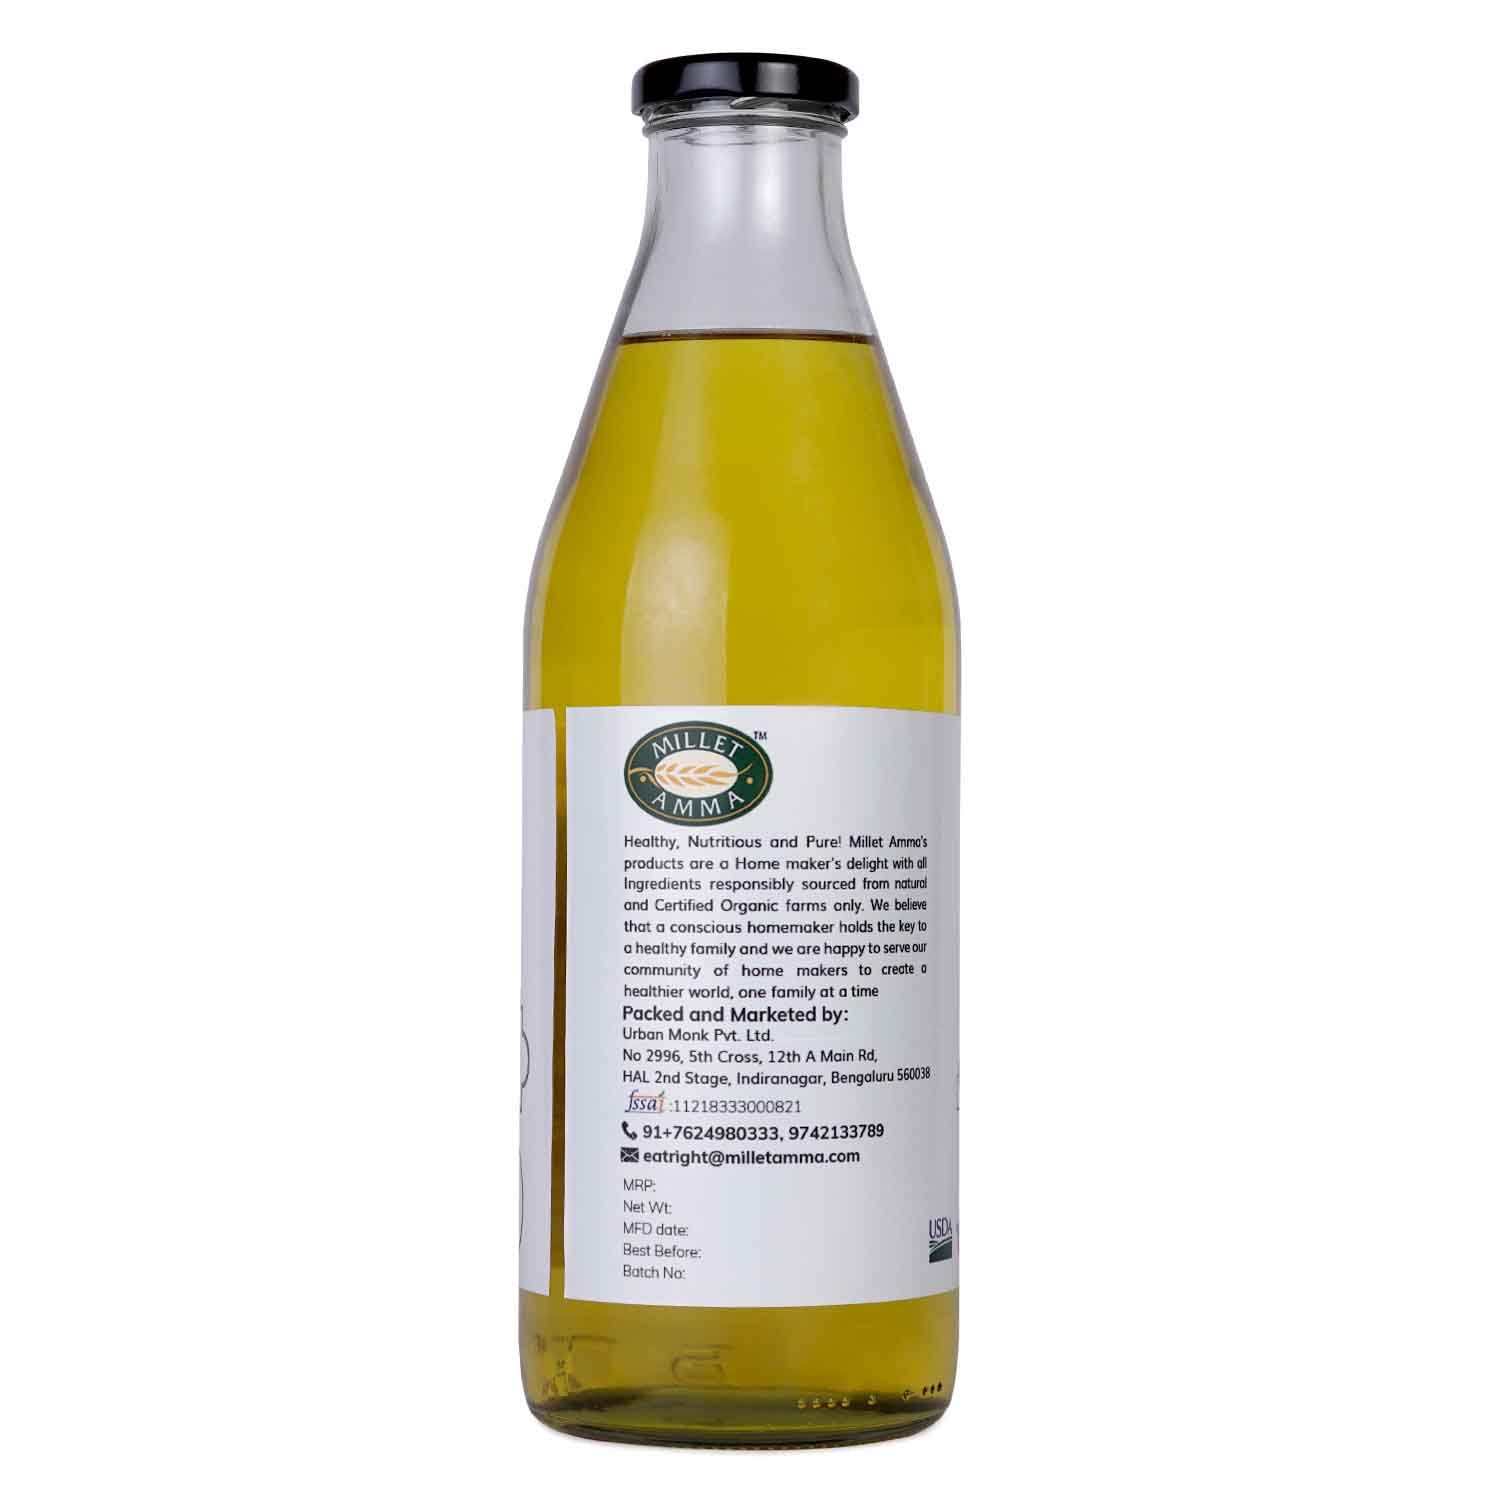 Milletamma’s cold pressed groundnut oil is the obtained from the Organic groundnuts which contains phytosterols. The phytosterols compounds helps to reduce the cholesterol level and promote excretion.